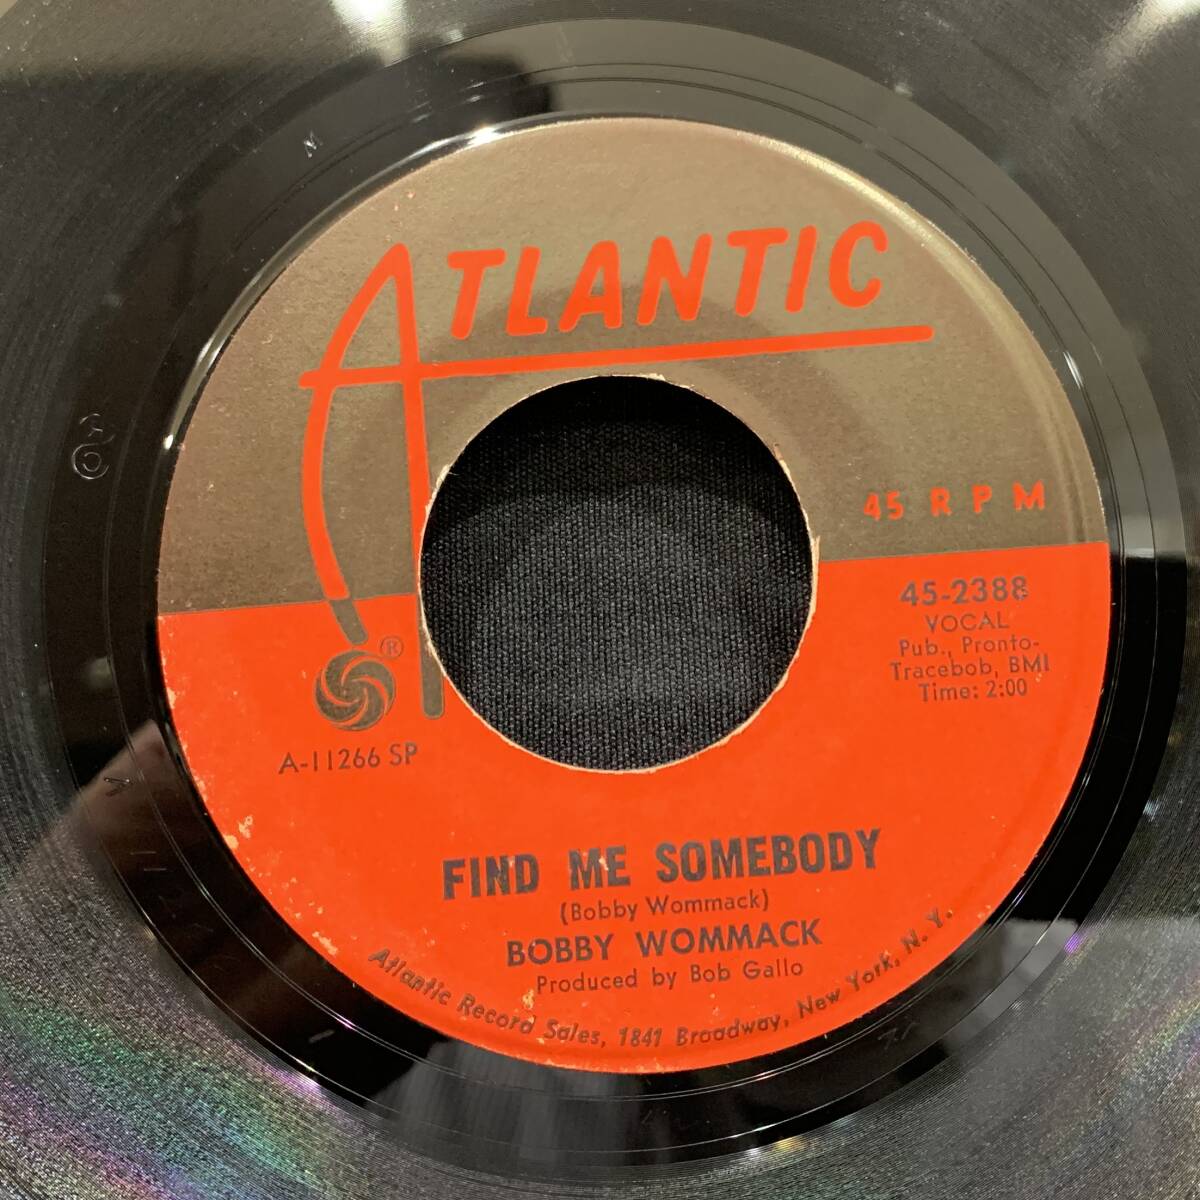 [EP]Bobby Wommack - Find Me Somebody / How Does It Feel 1967 year US original SP Atlantic 45-2388